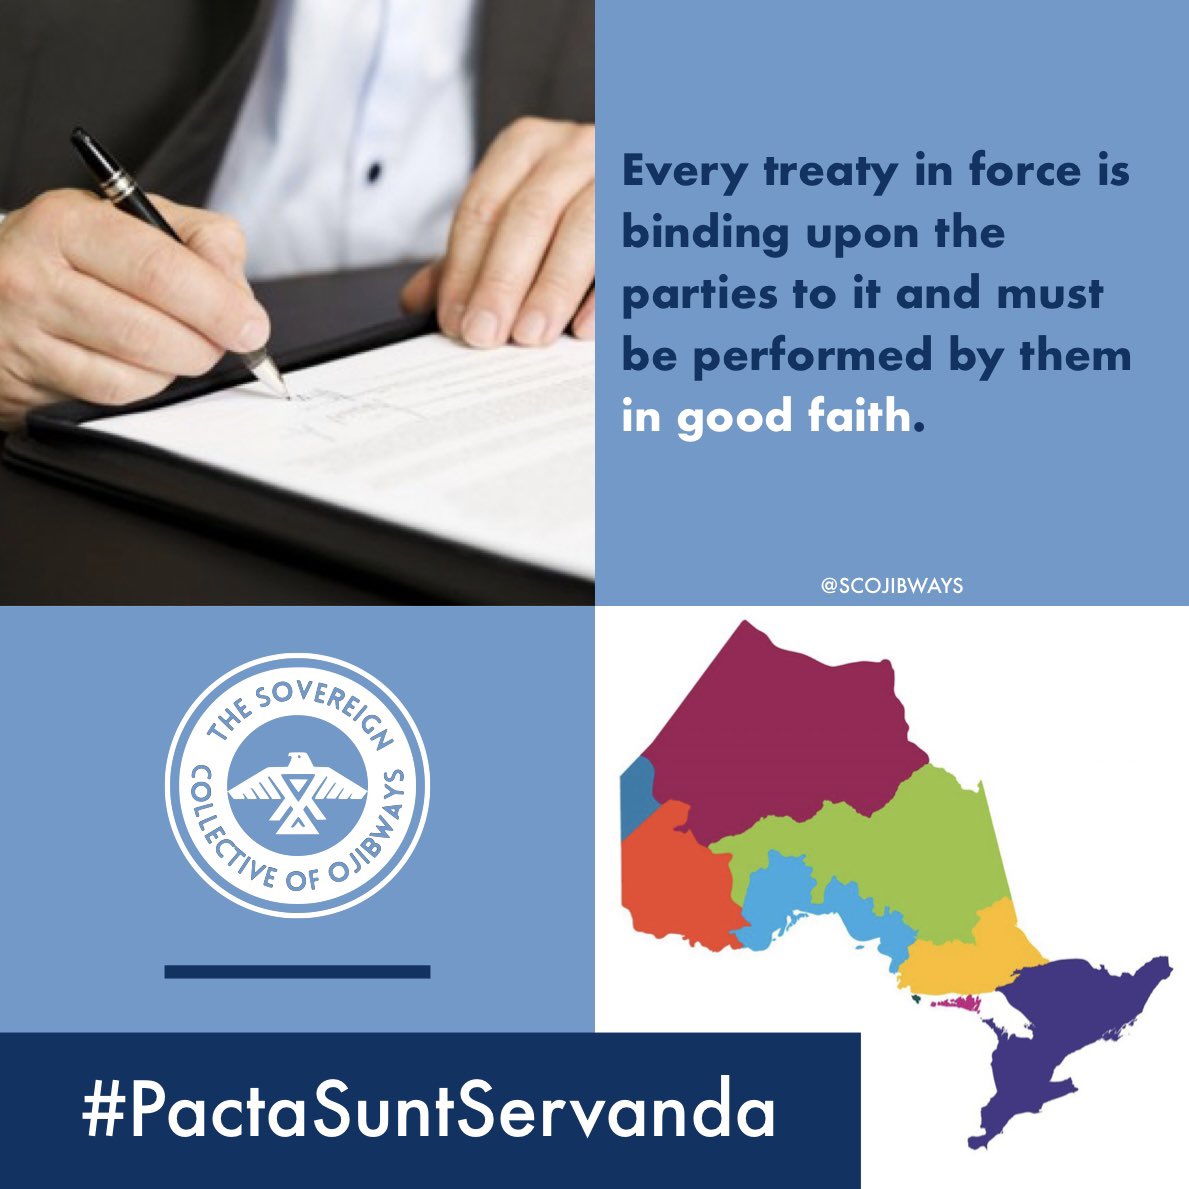 ⚖️📚 — Every treaty in force is binding upon the parties to it and must be performed by them in good faith. #PactaSuntServanda #HonourTheTreaties